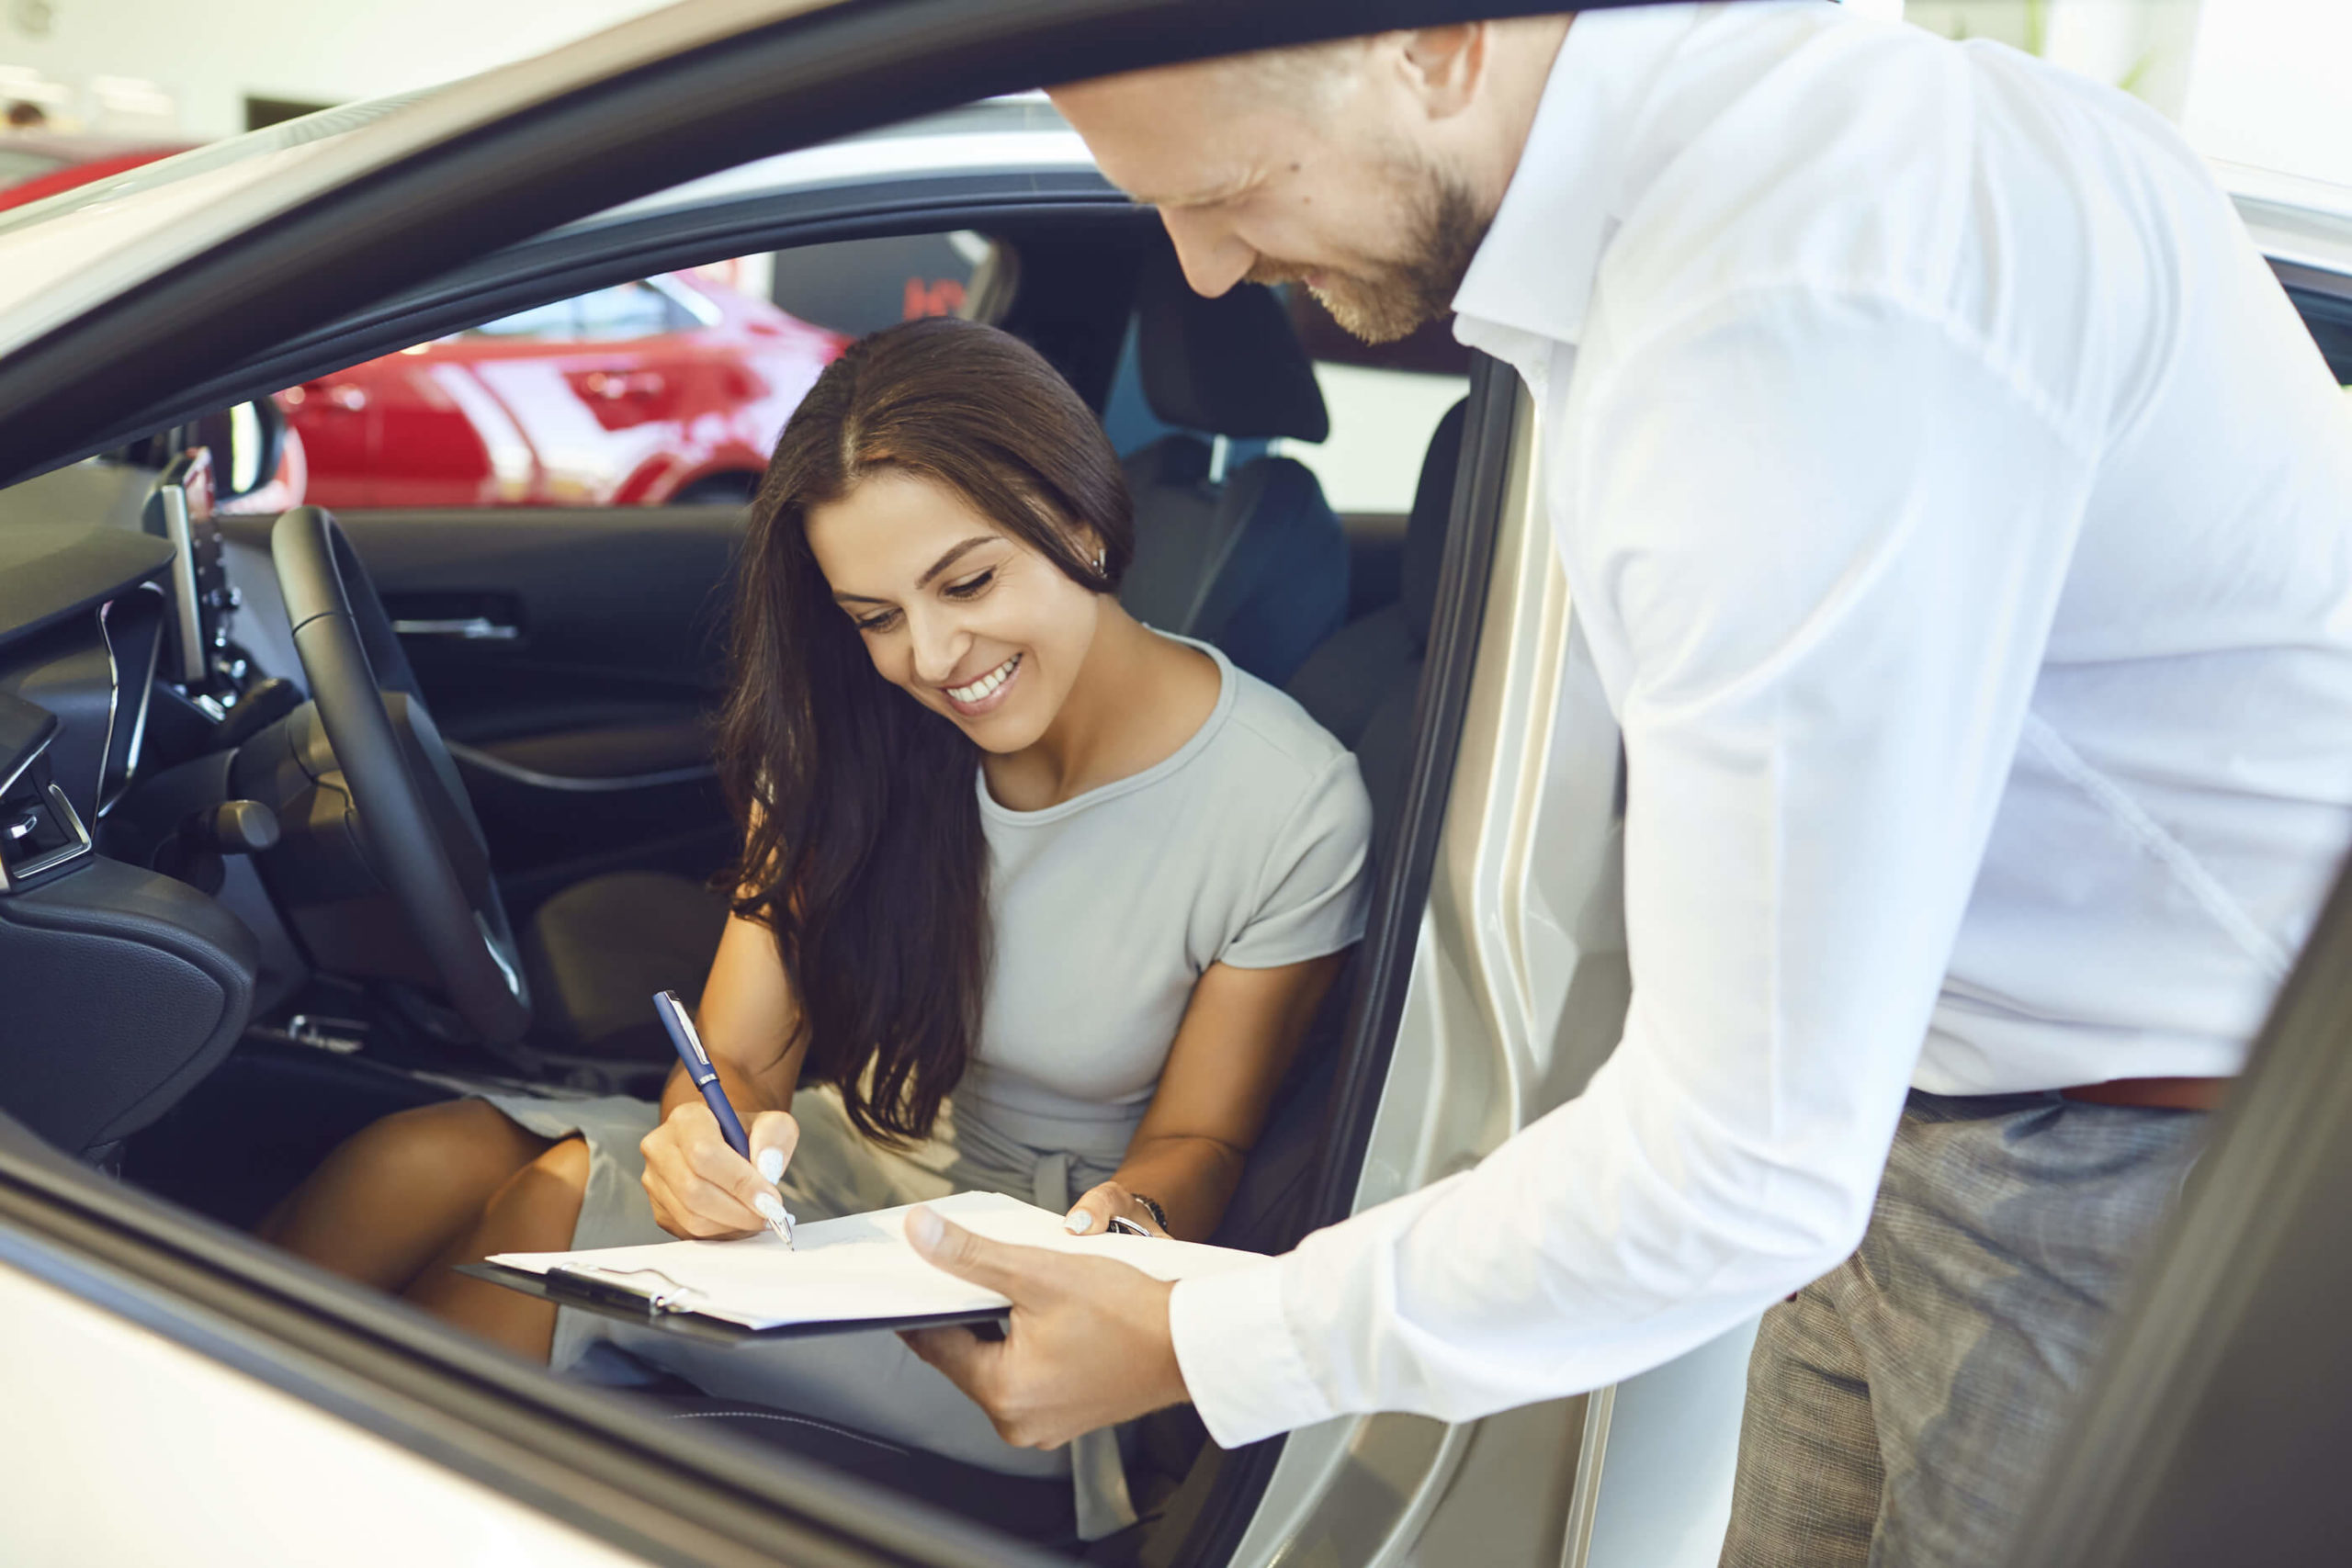 Renting A Vehicle